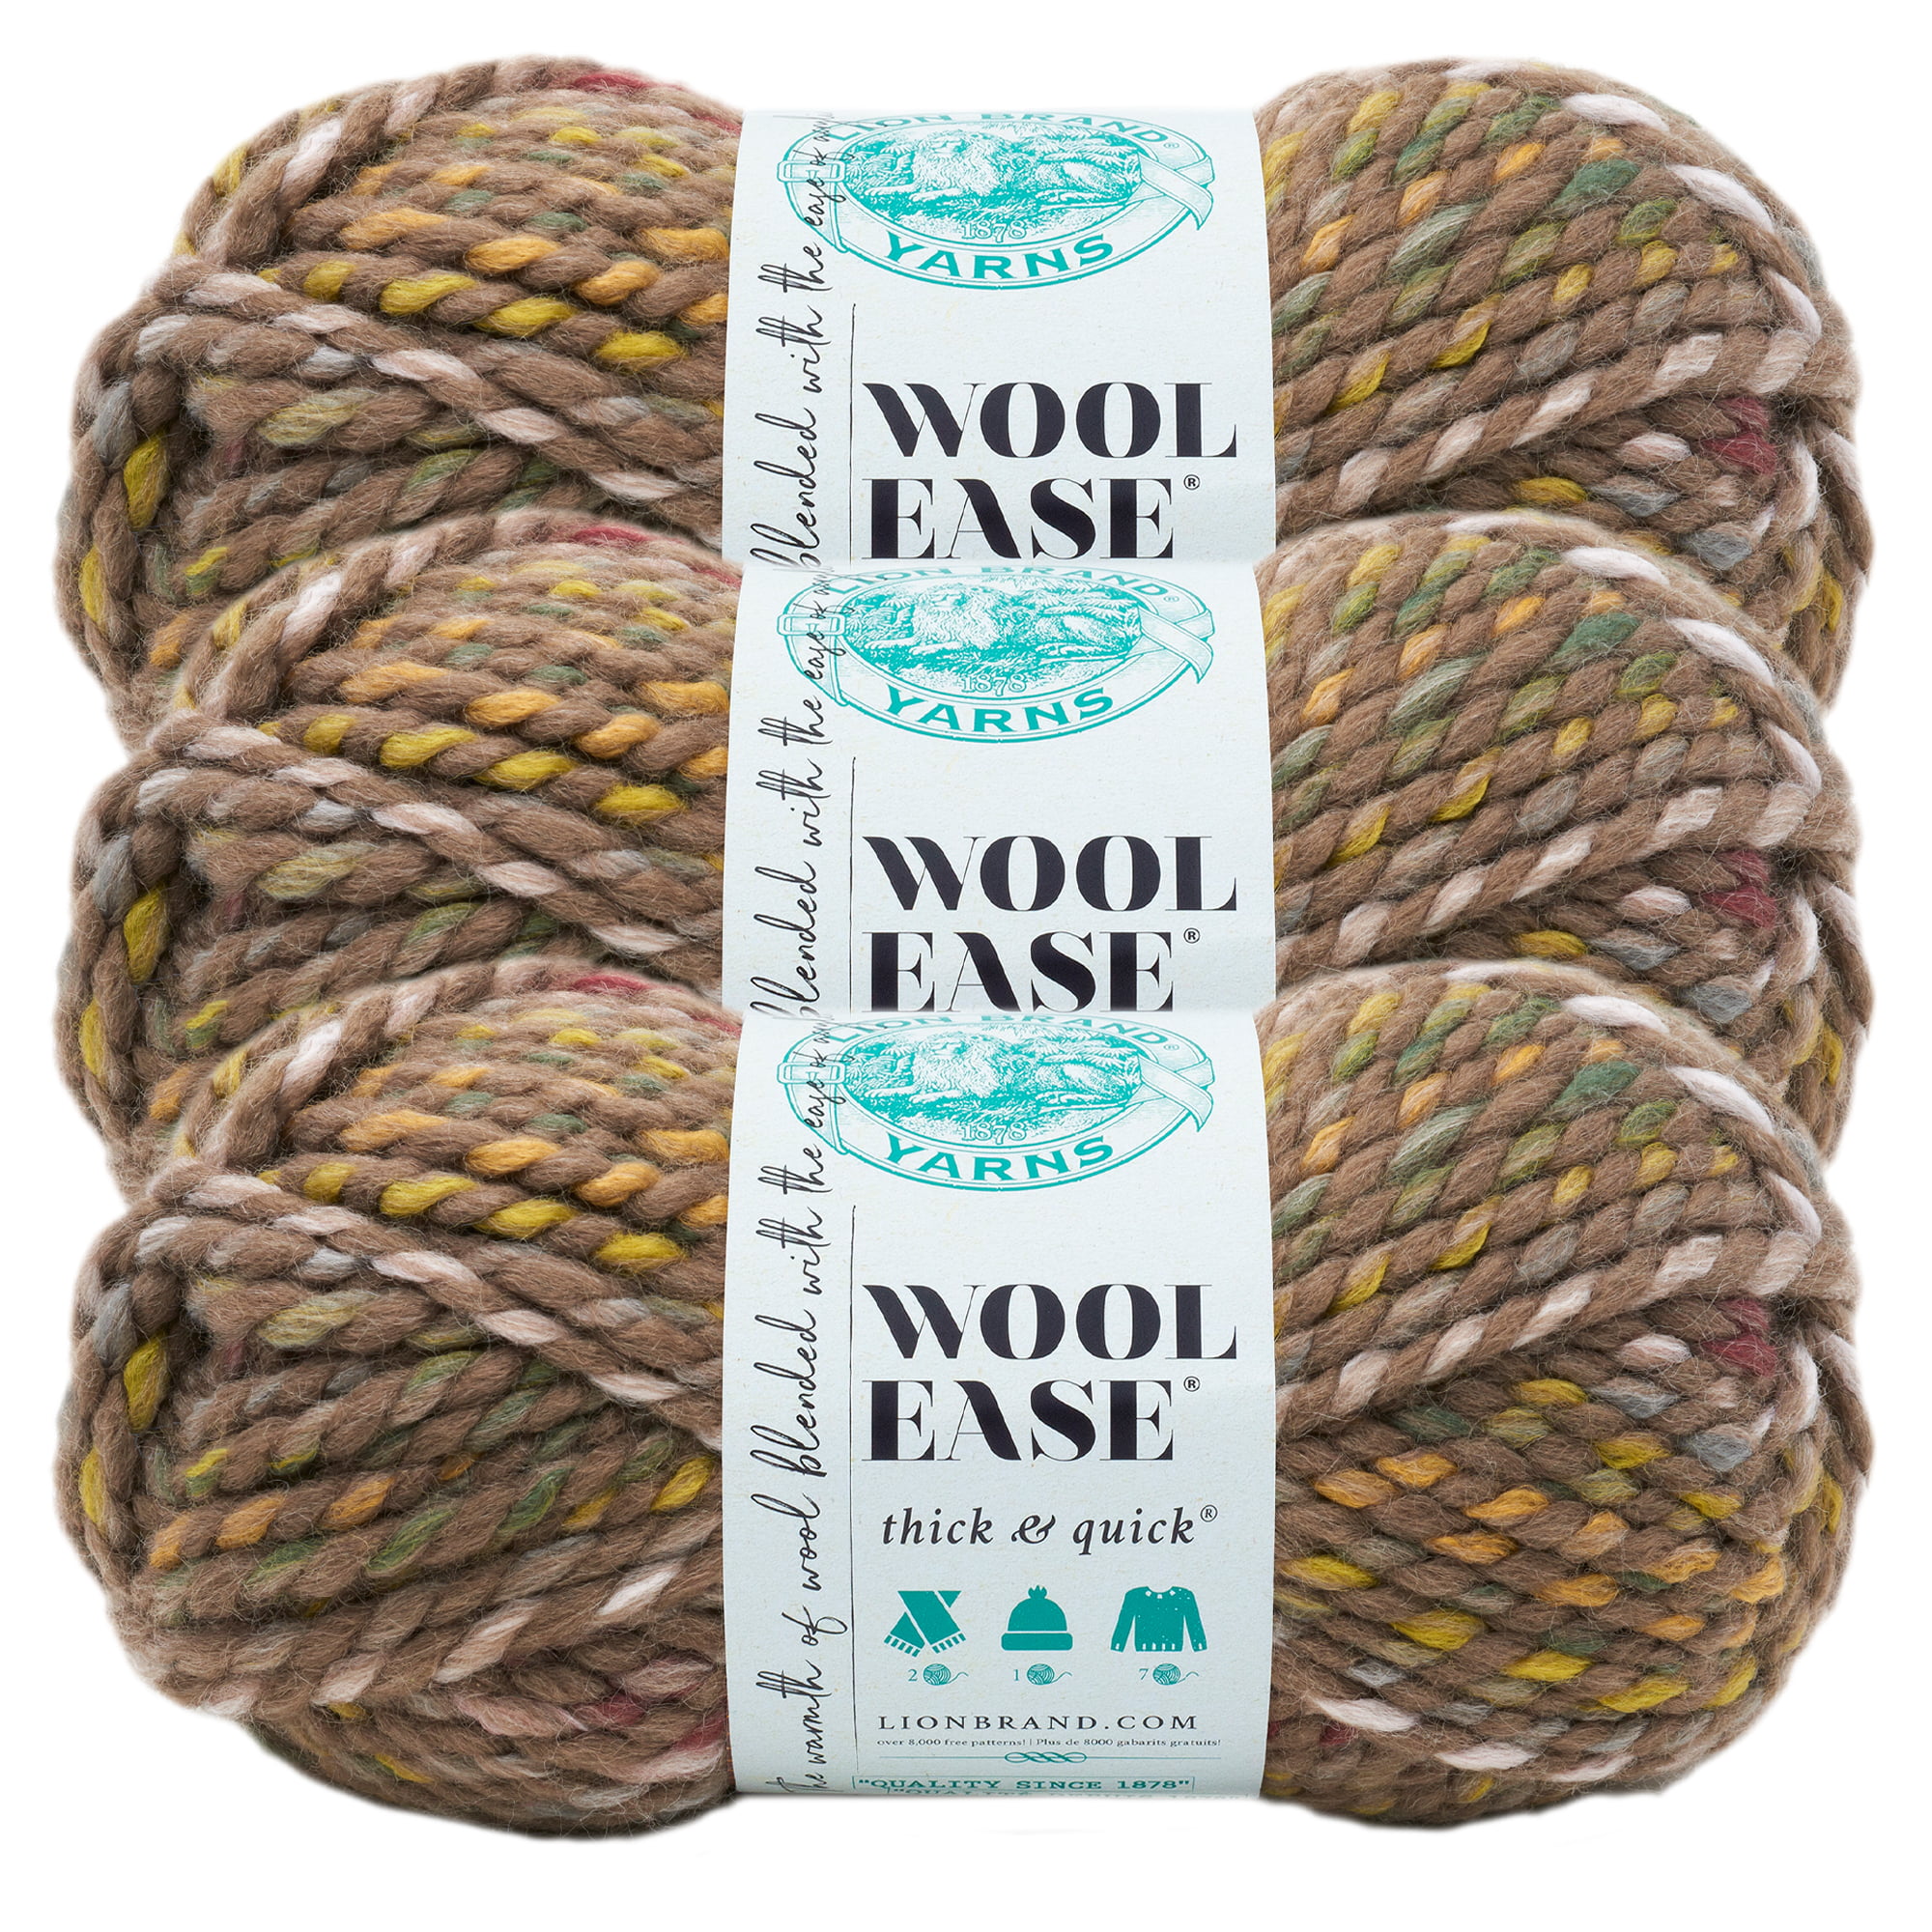 Lion Brand Wool-Ease Thick & Quick Yarn-Arctic Ice, 1 count - Kroger